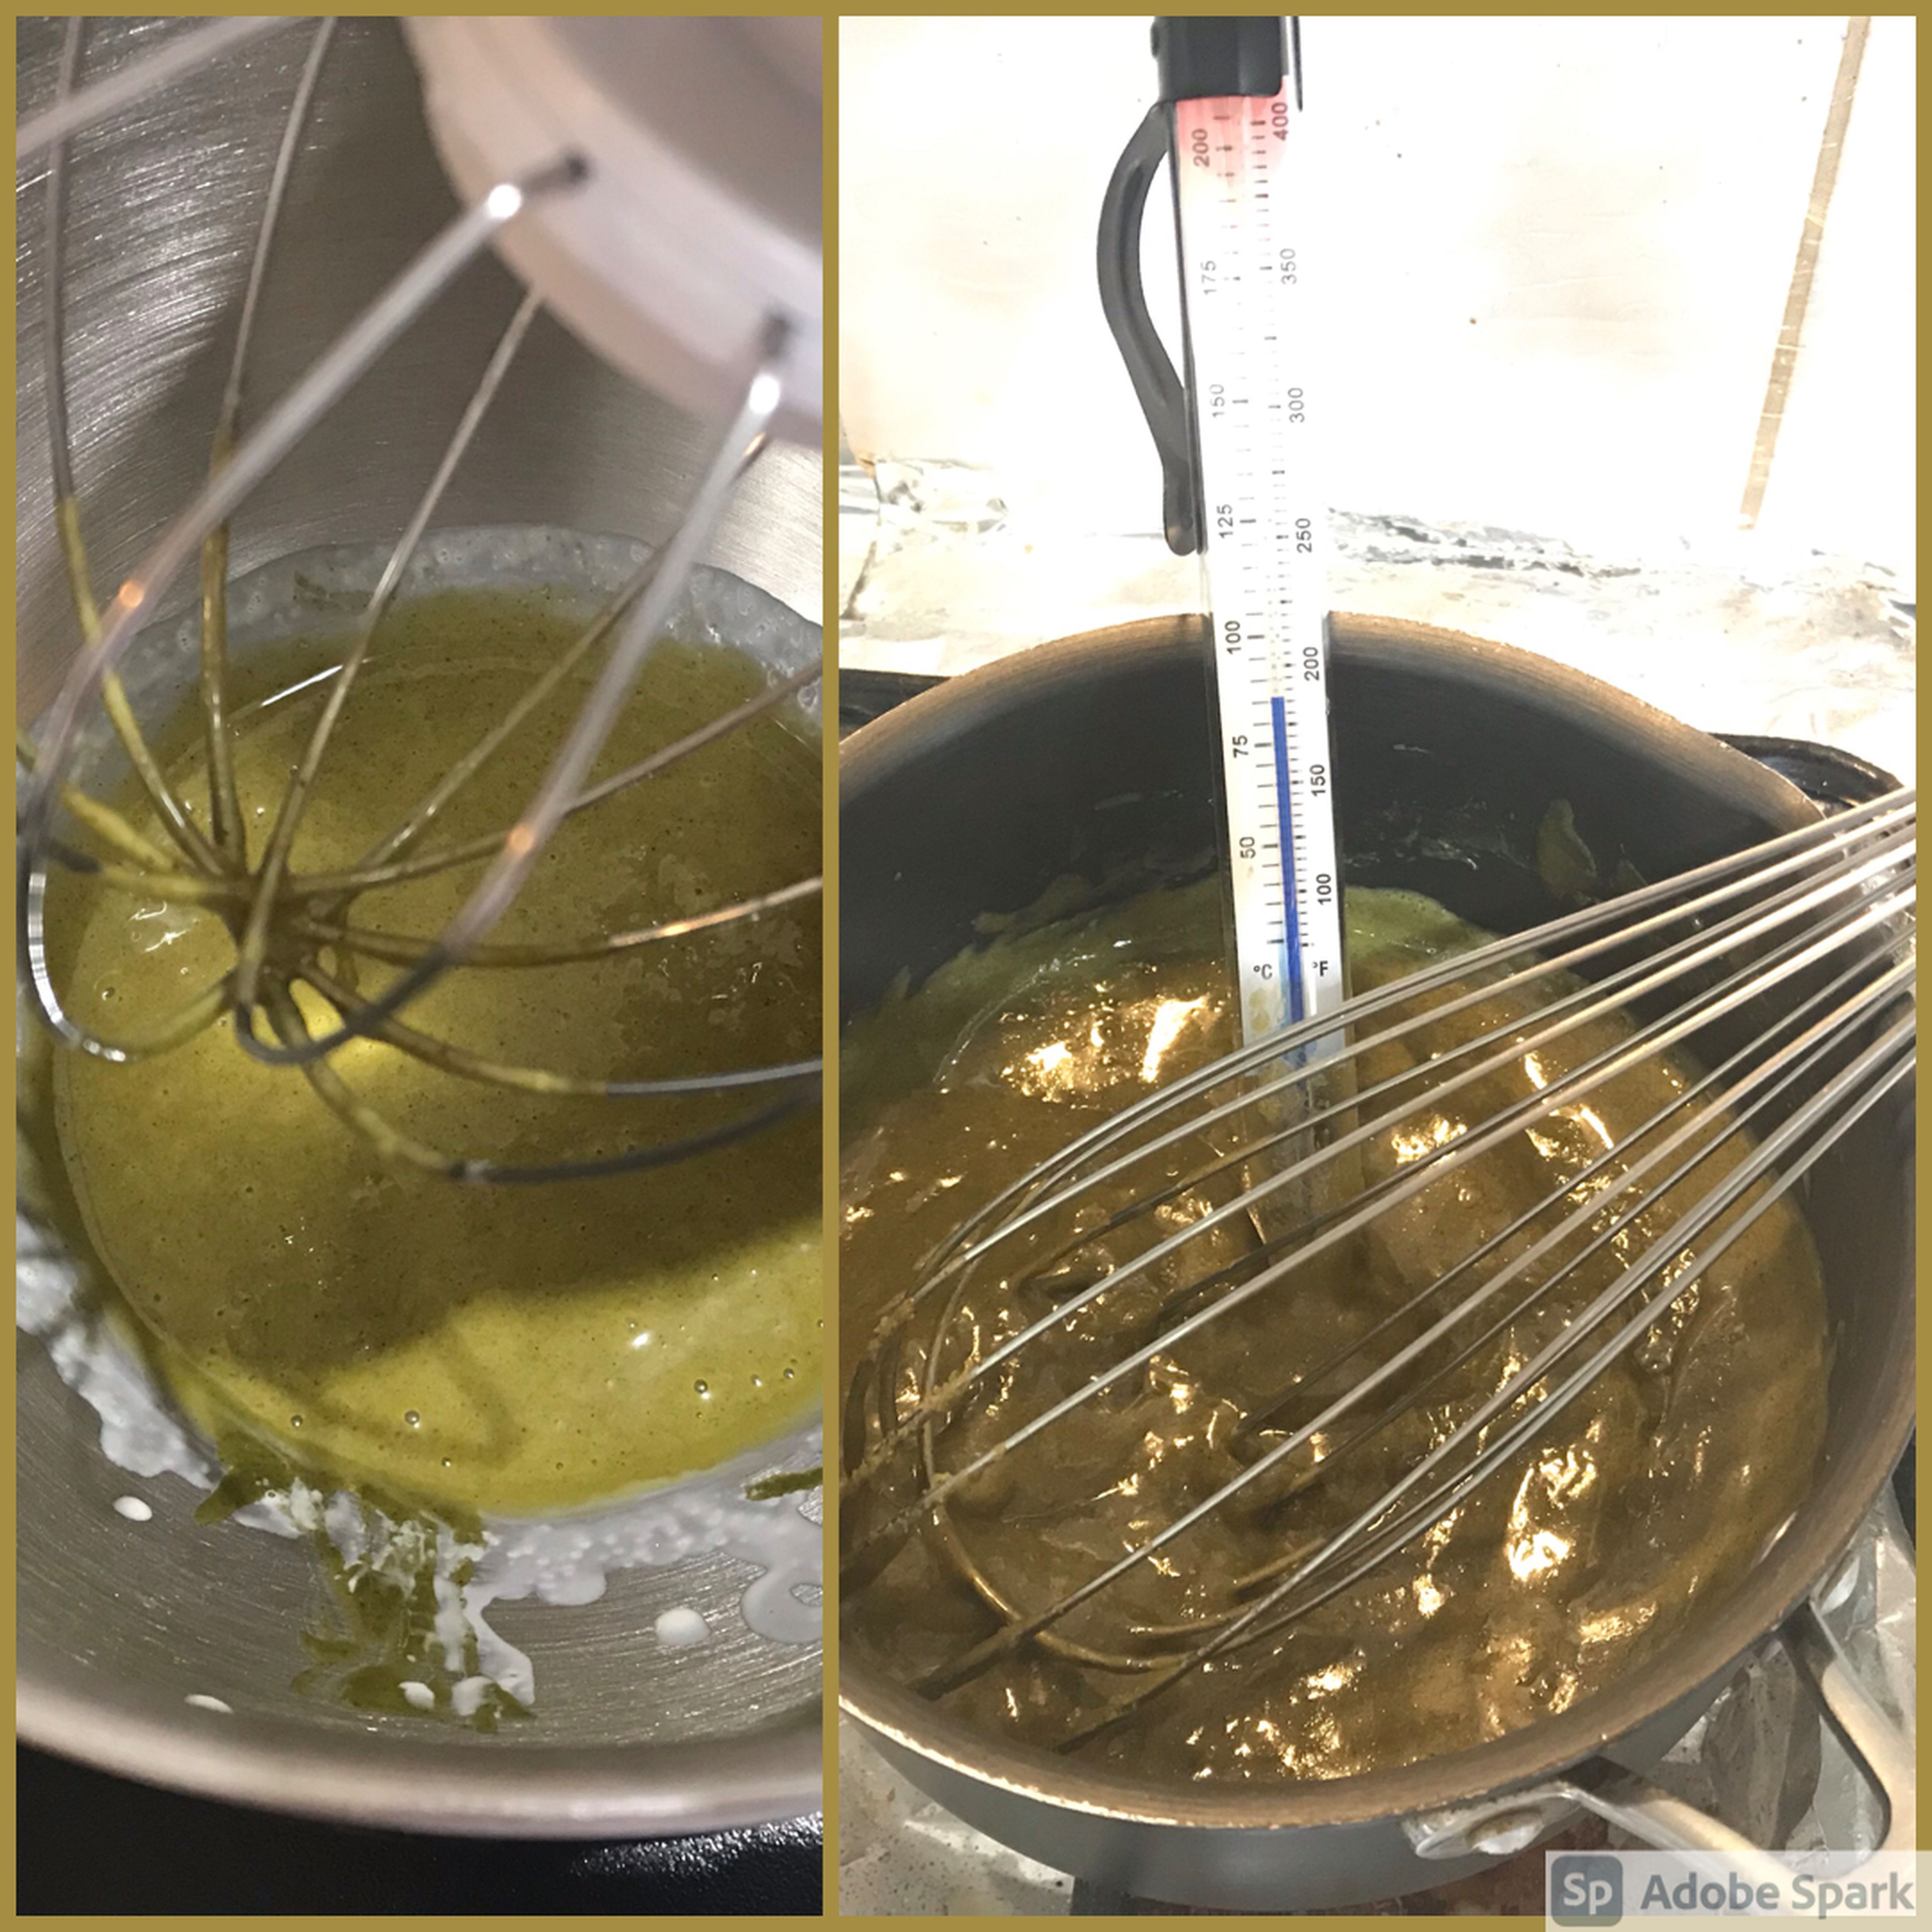 Remove cream from heat and pour into egg mixture, whisking continuously until combined. Pour mixture into saucepan and stir continuously over medium heat until mixture reaches 80C.